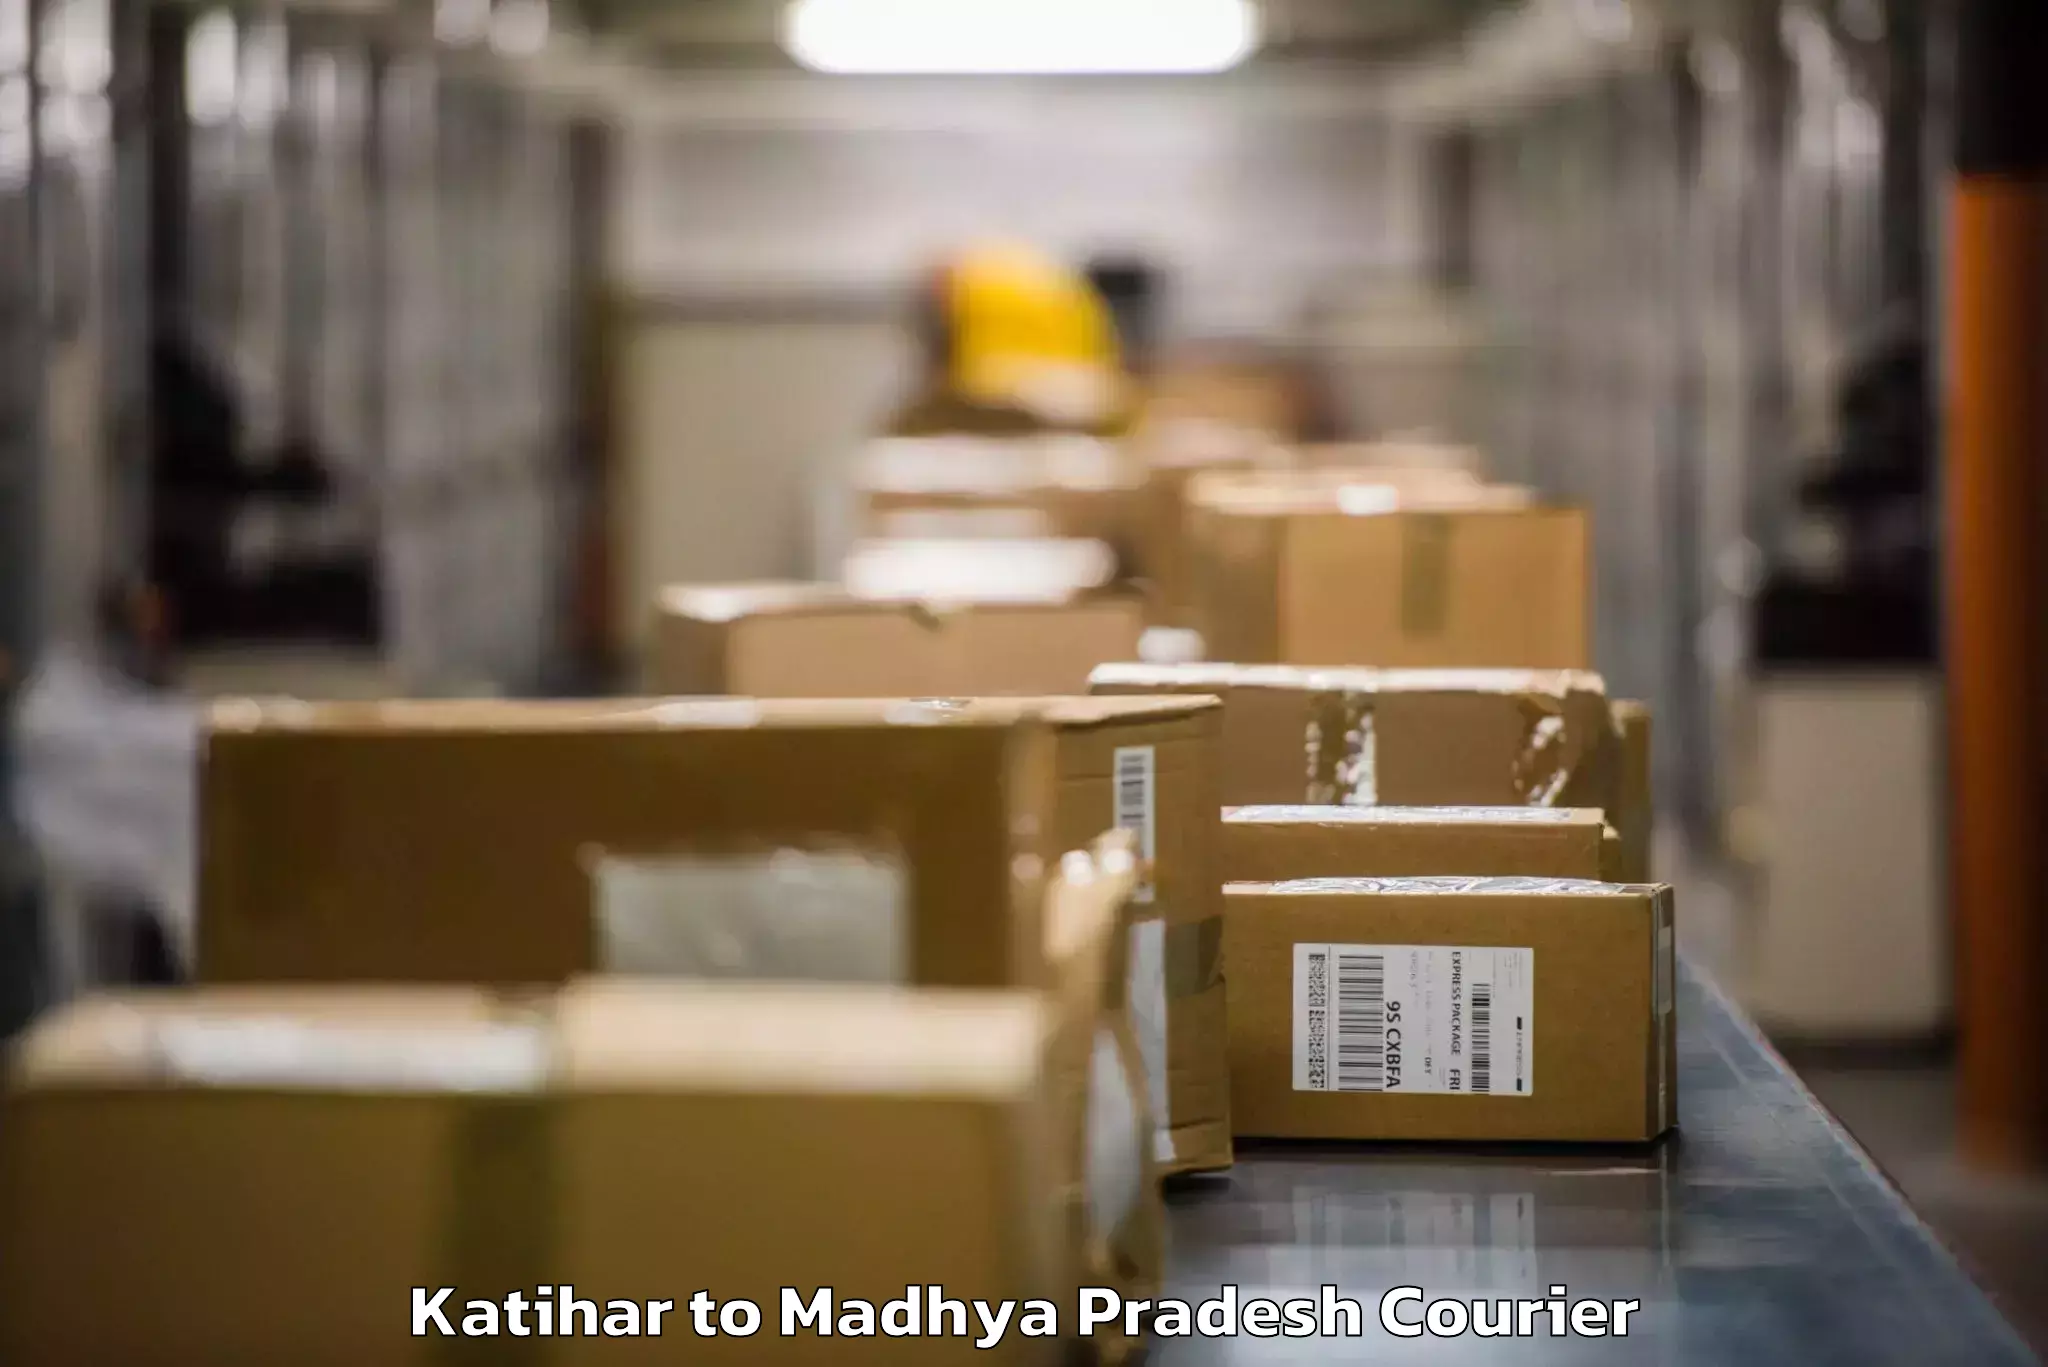 Luggage delivery providers Katihar to Bhopal